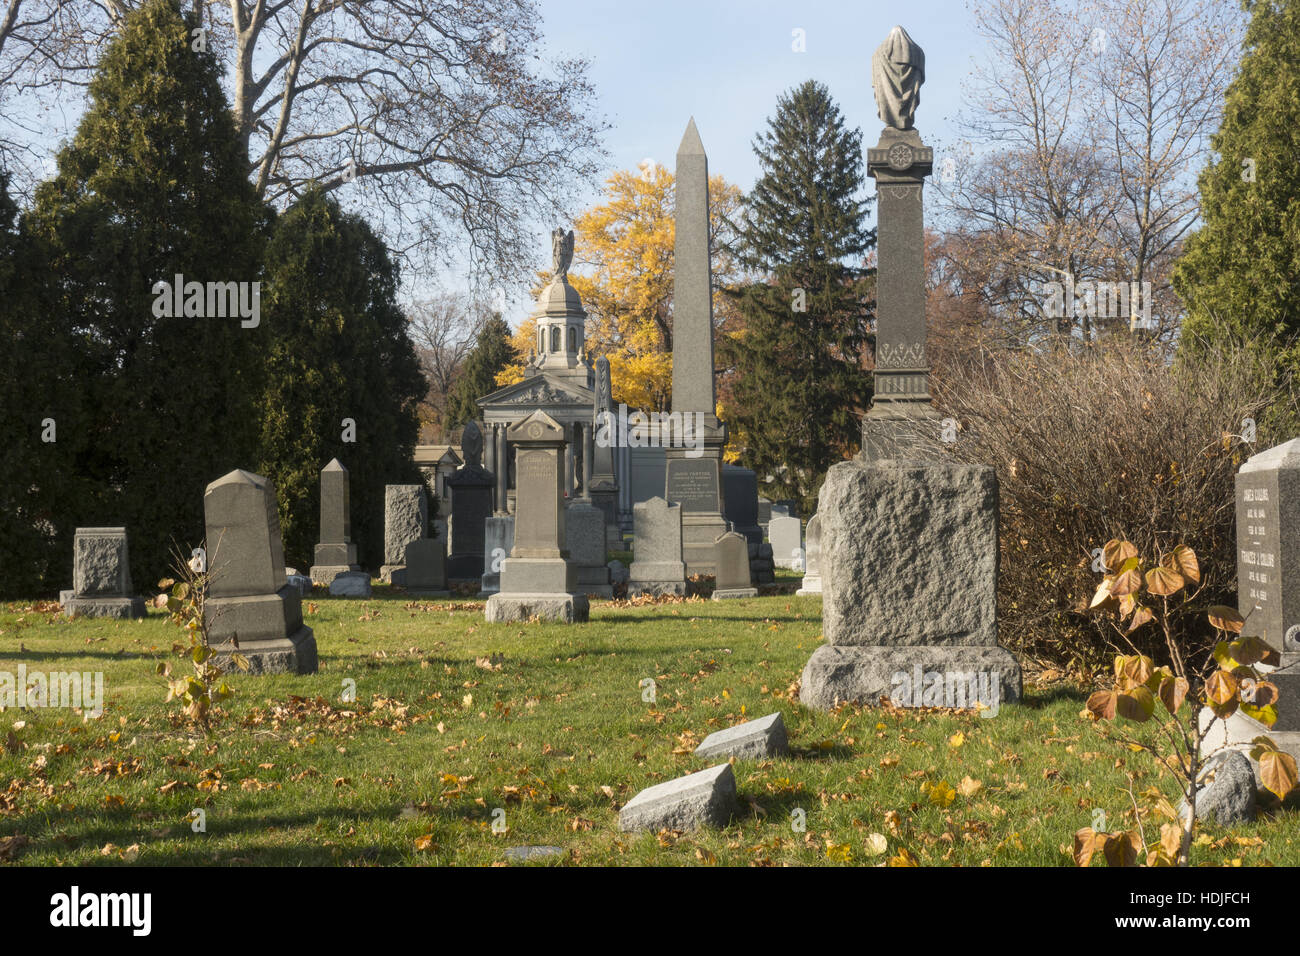 Looking into the historic & famous Greenwood Cemetery along Fort Hamilton Pkwy in Brooklyn, new York. Stock Photo